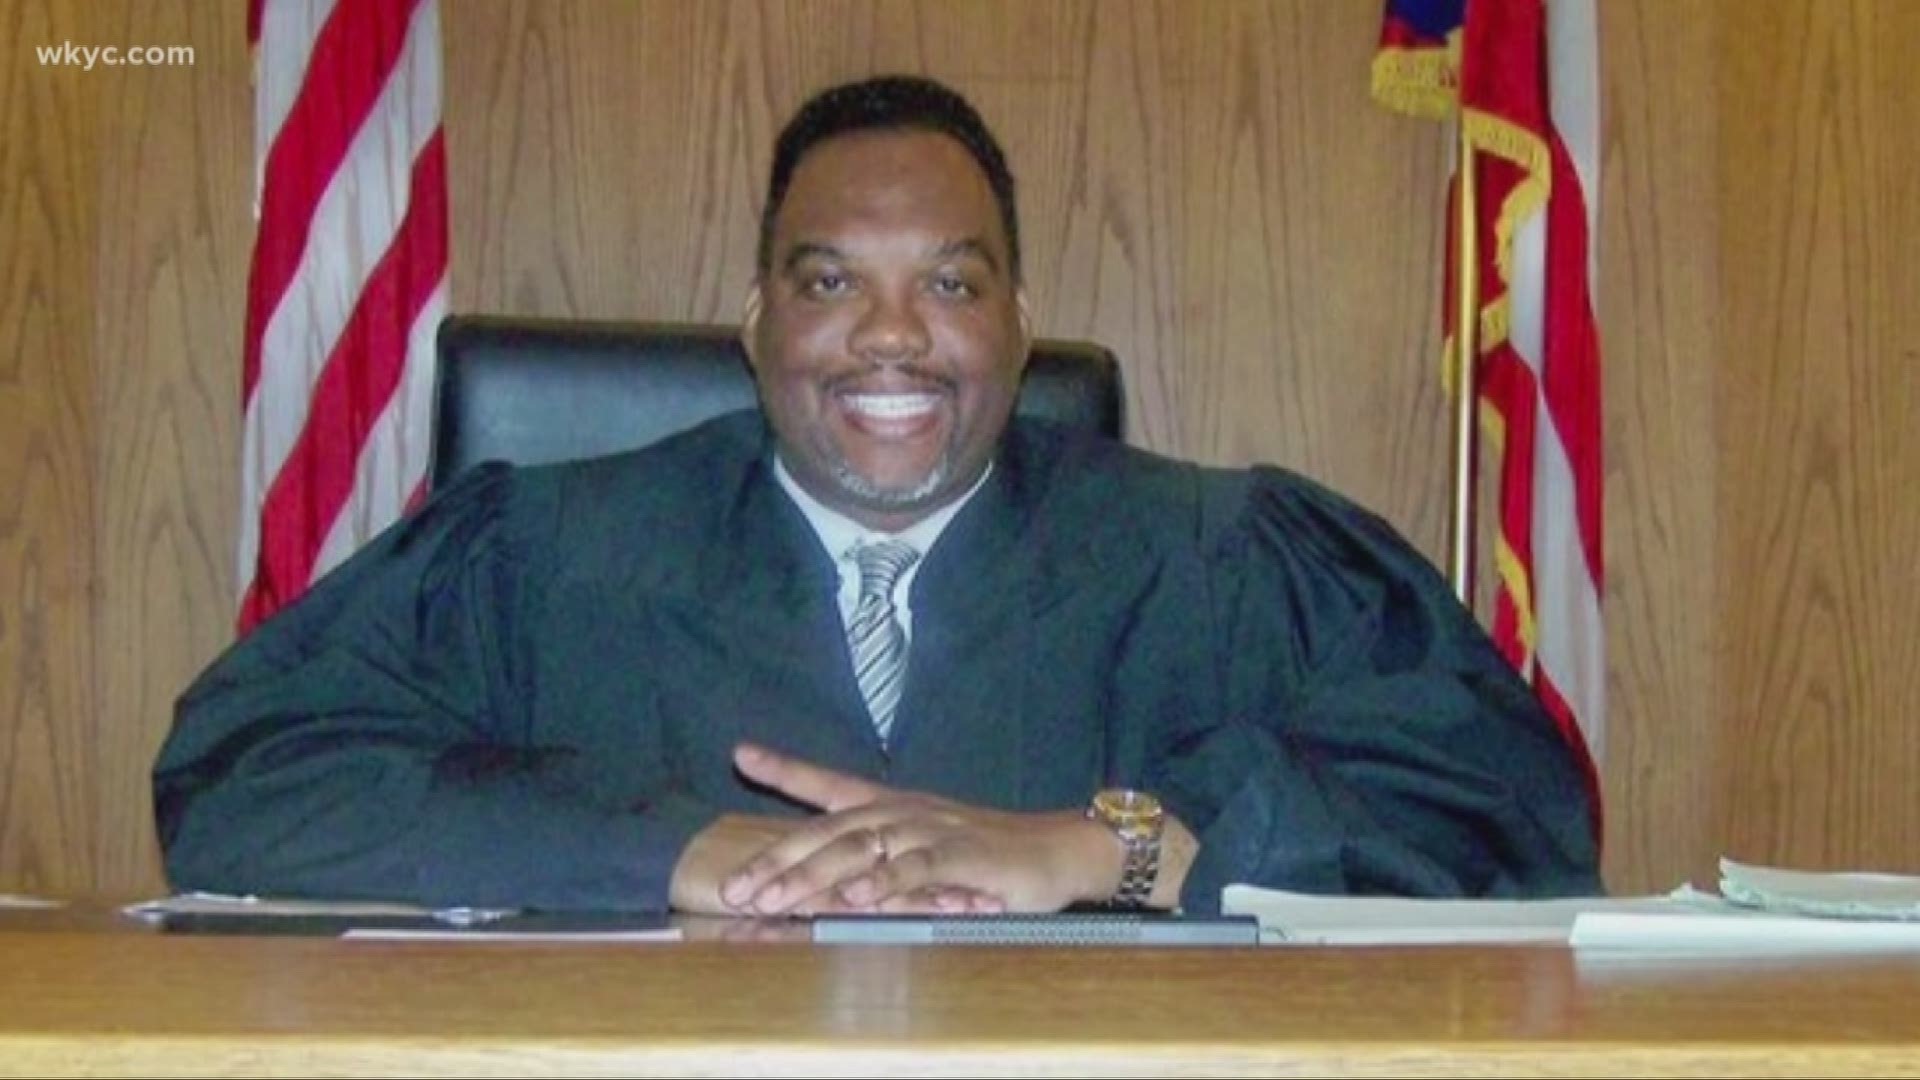 Disgraced former Cuyahoga County Judge Lance Mason accused of fatally stabbing ex-wife